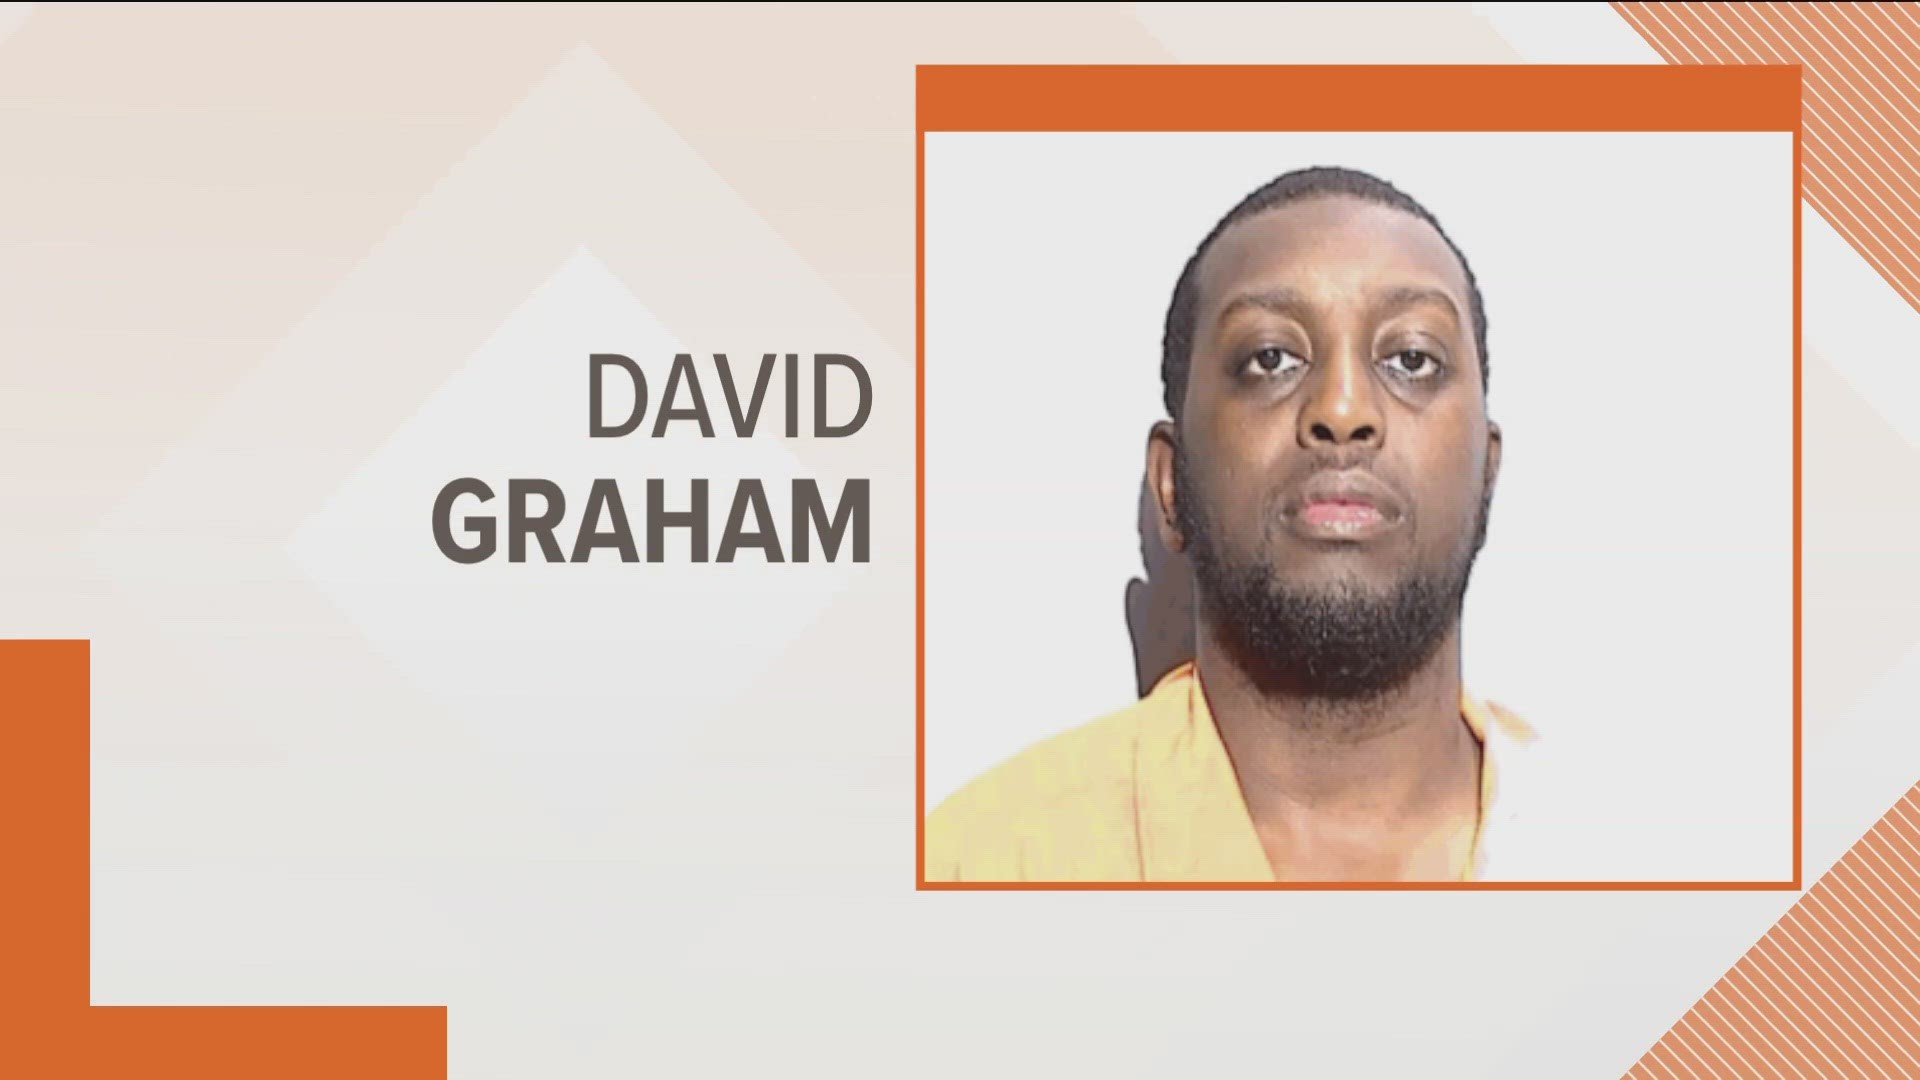 David Graham was arrested after an alleged assault early Wednesday.